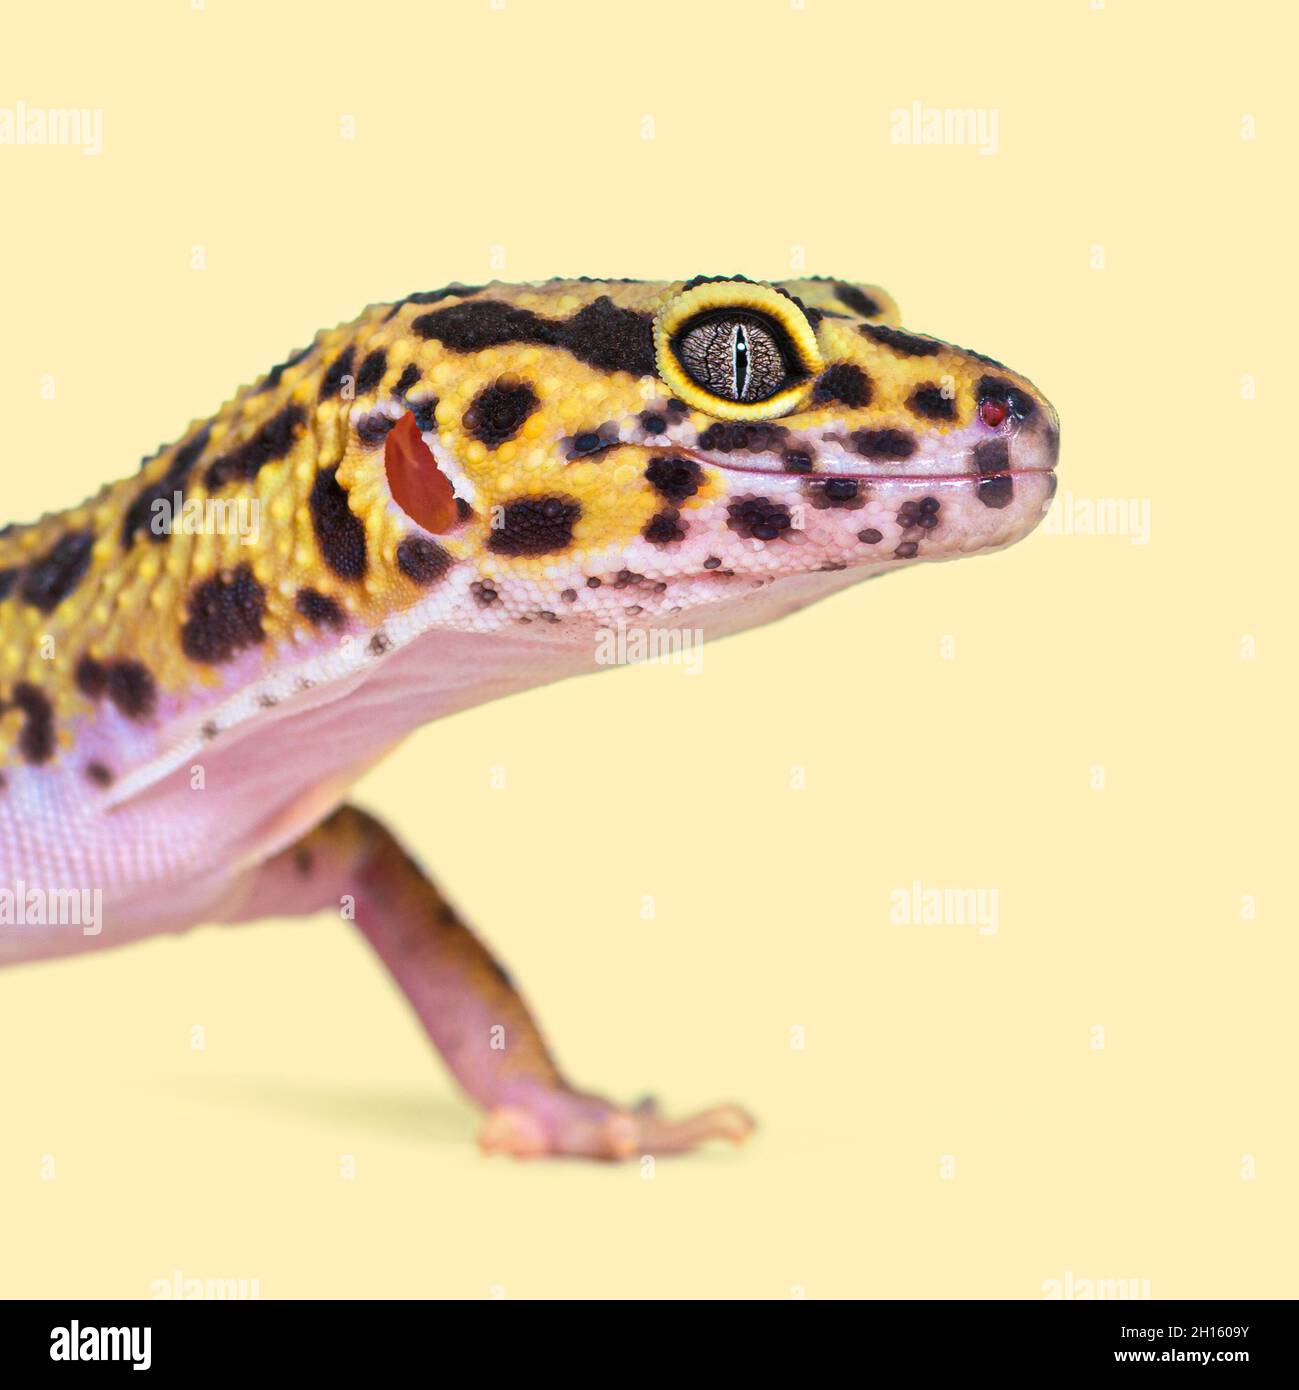 Head shot of a Leopard gecko on a cream background Stock Photo